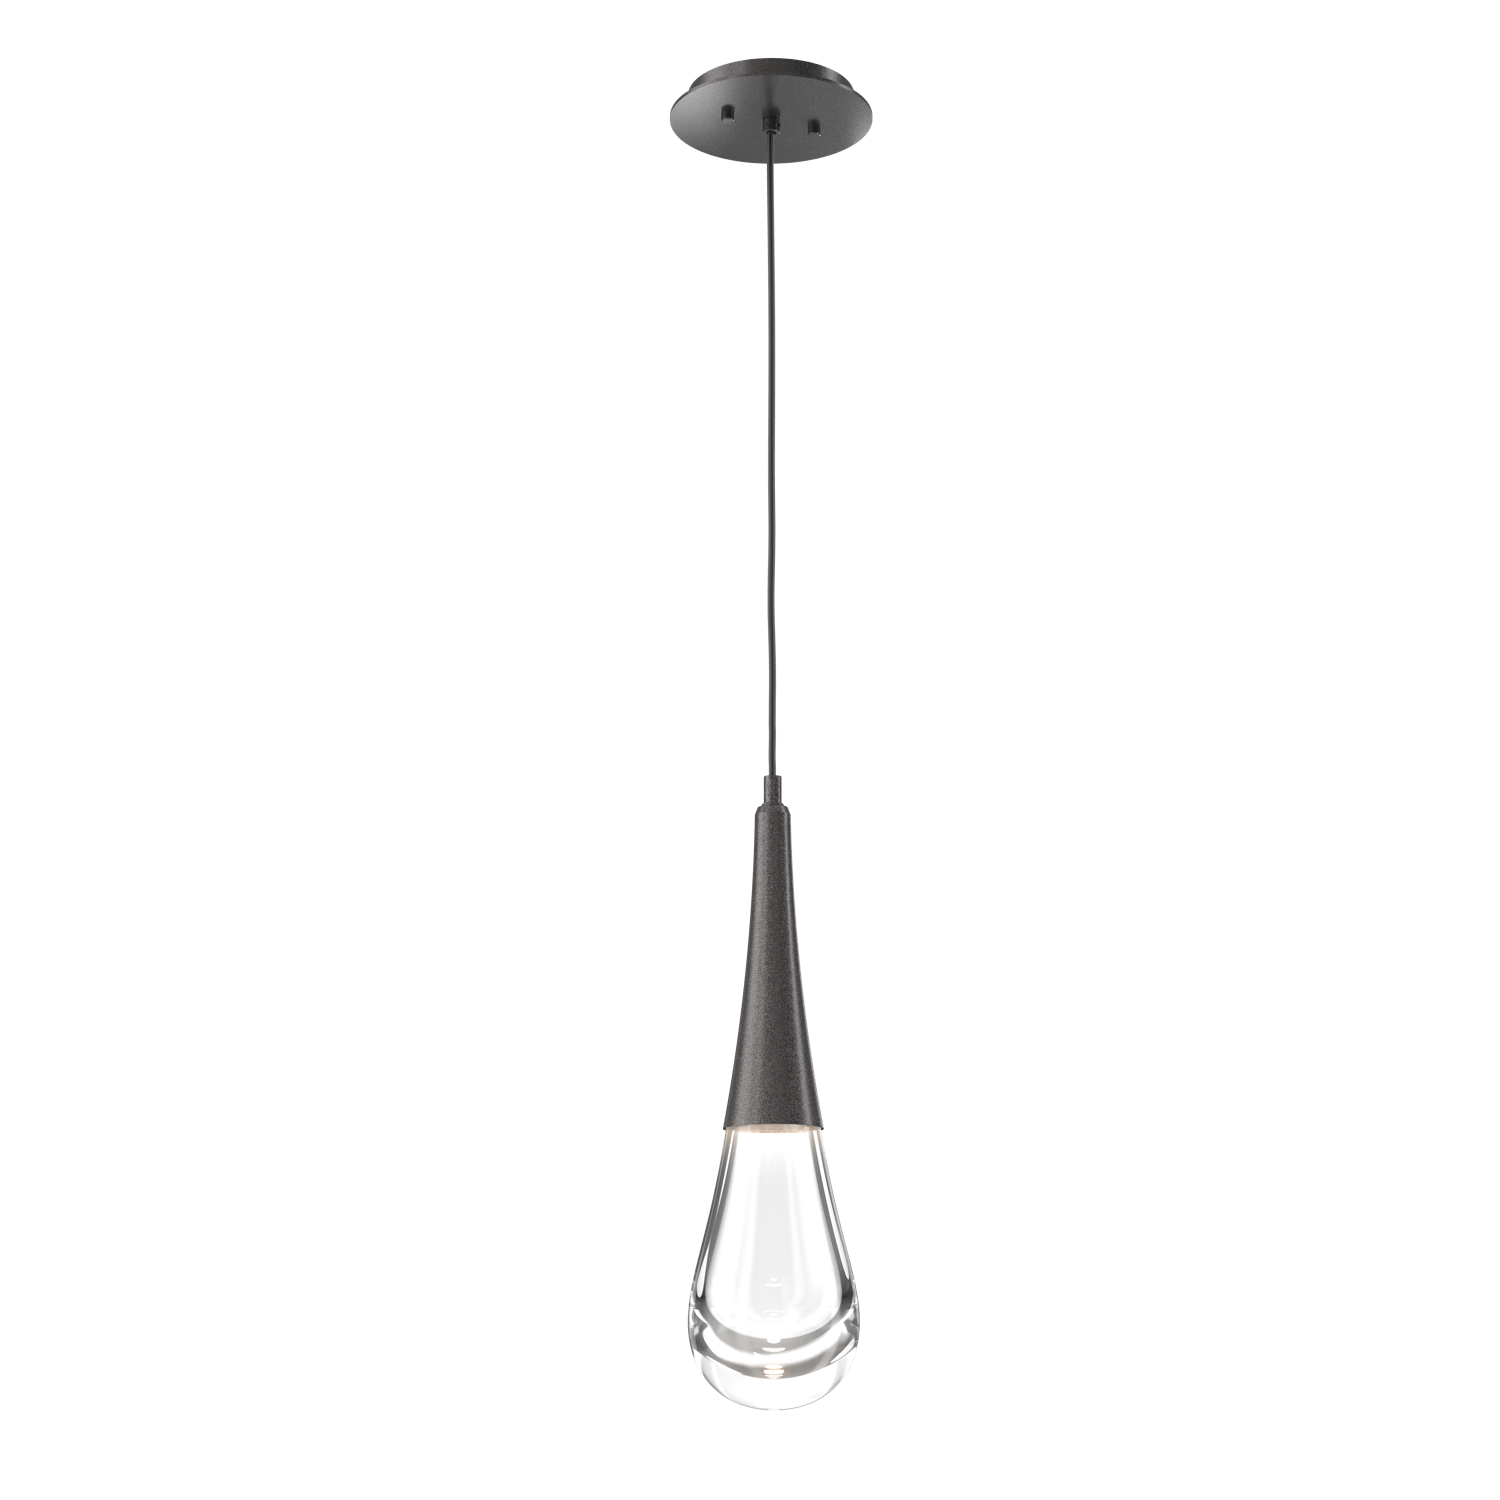 LAB0078-01-GP-Hammerton-Studio-Raindrop-pendant-light-with-graphite-finish-and-clear-blown-glass-shades-and-LED-lamping